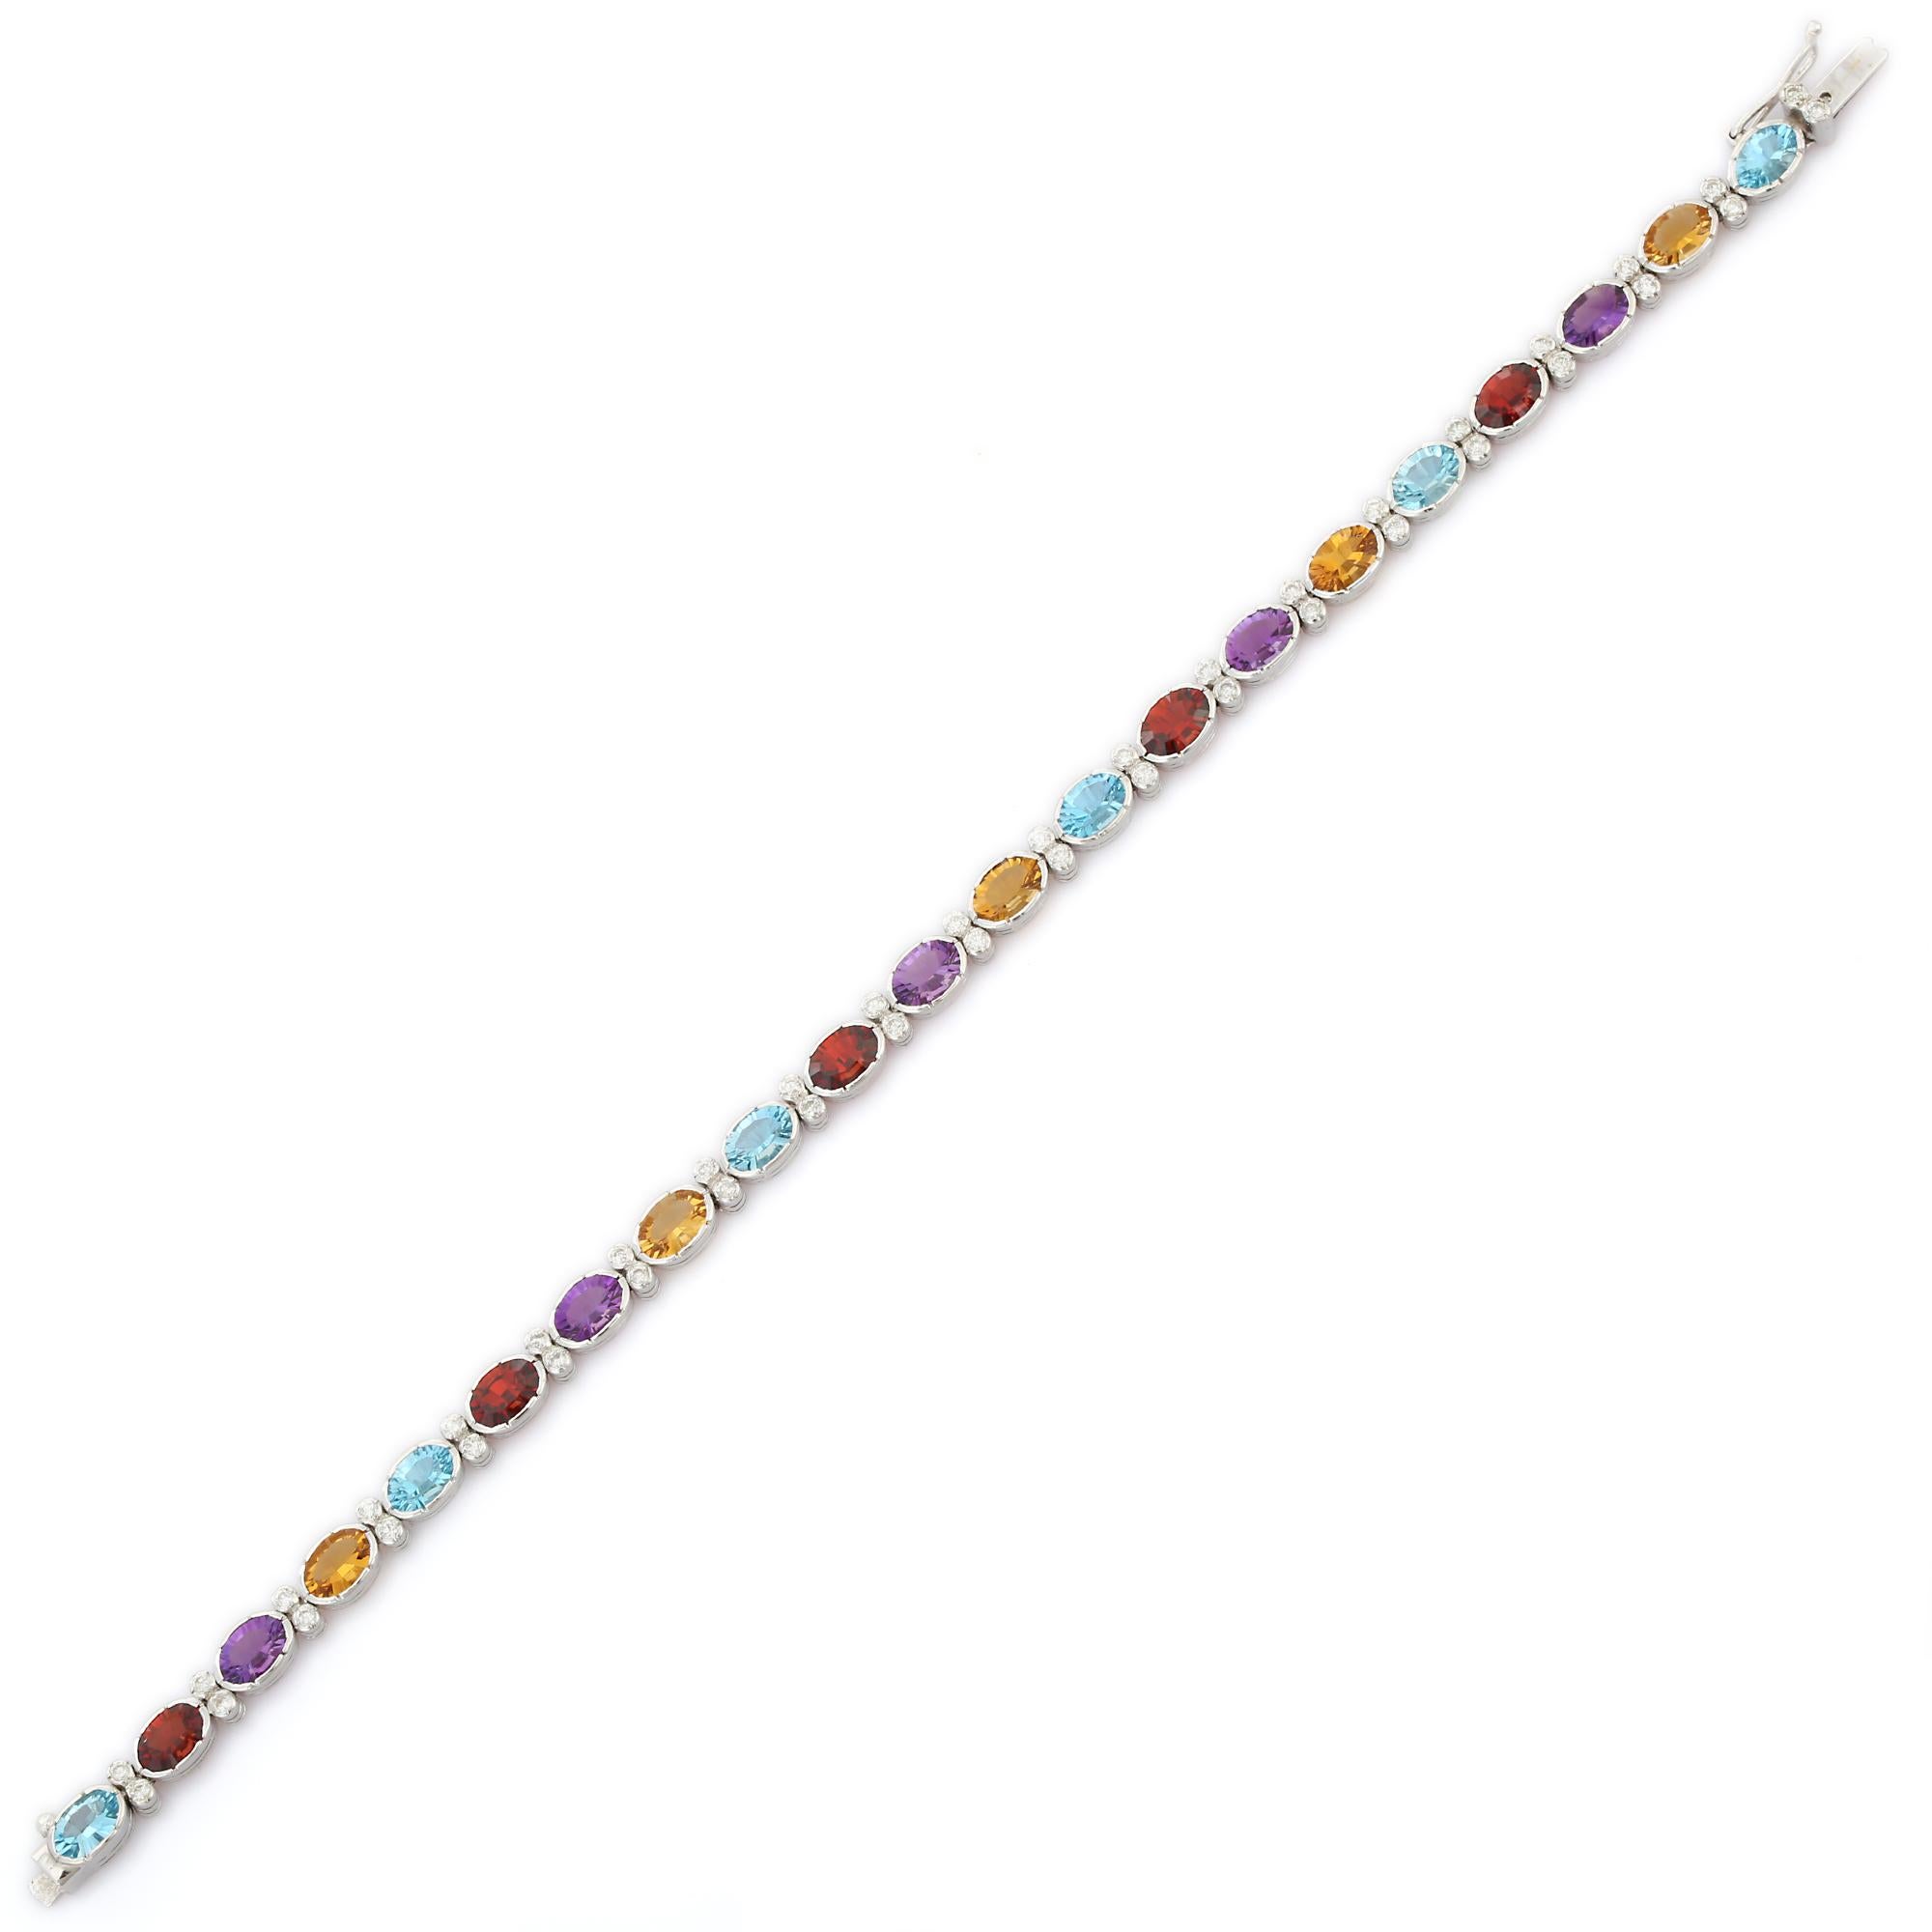 Semi precious gemstone bracelet in 18K Gold. It has a perfect oval cut gemstone studded with diamonds to make you stand out on any occasion or an event.
A tennis bracelet is an essential piece of jewelry when it comes to your wedding day. The sleek